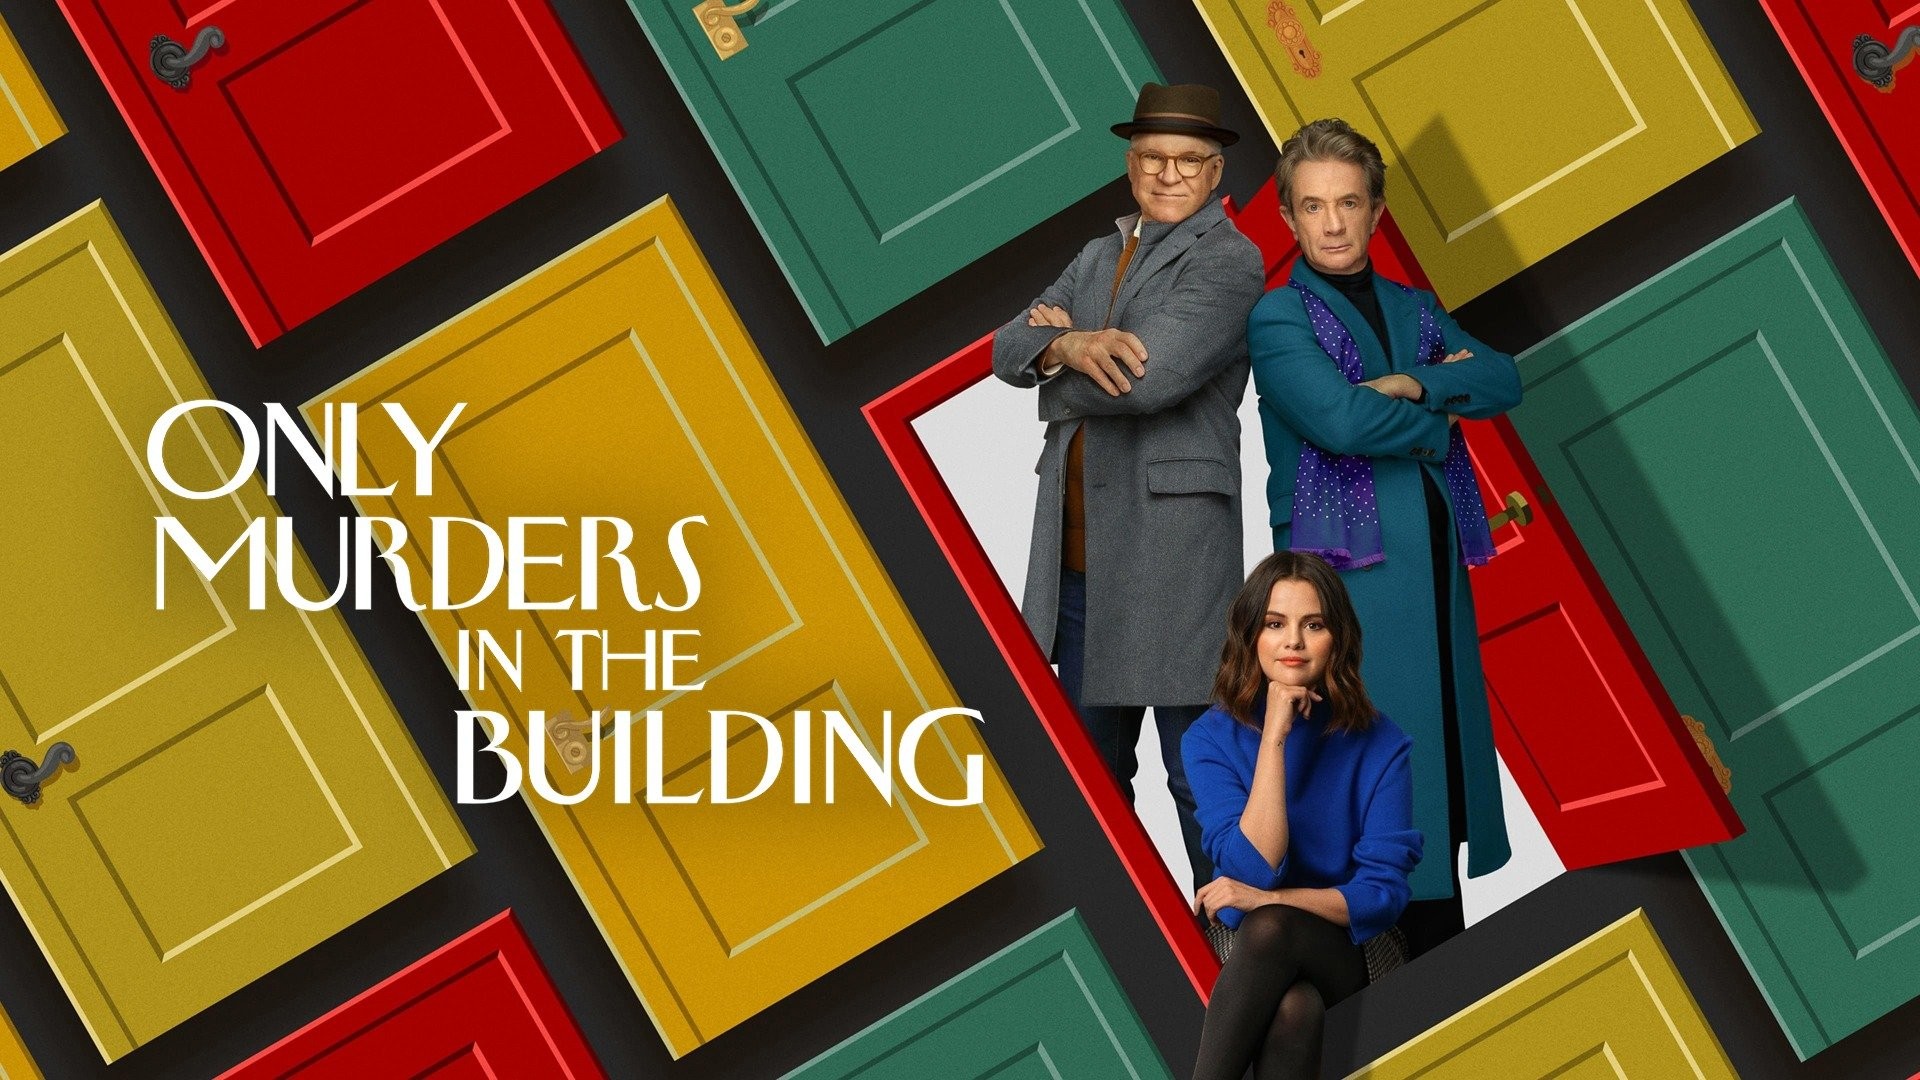 Only Murders in the Building Season 2: Release Date, Cast, and More